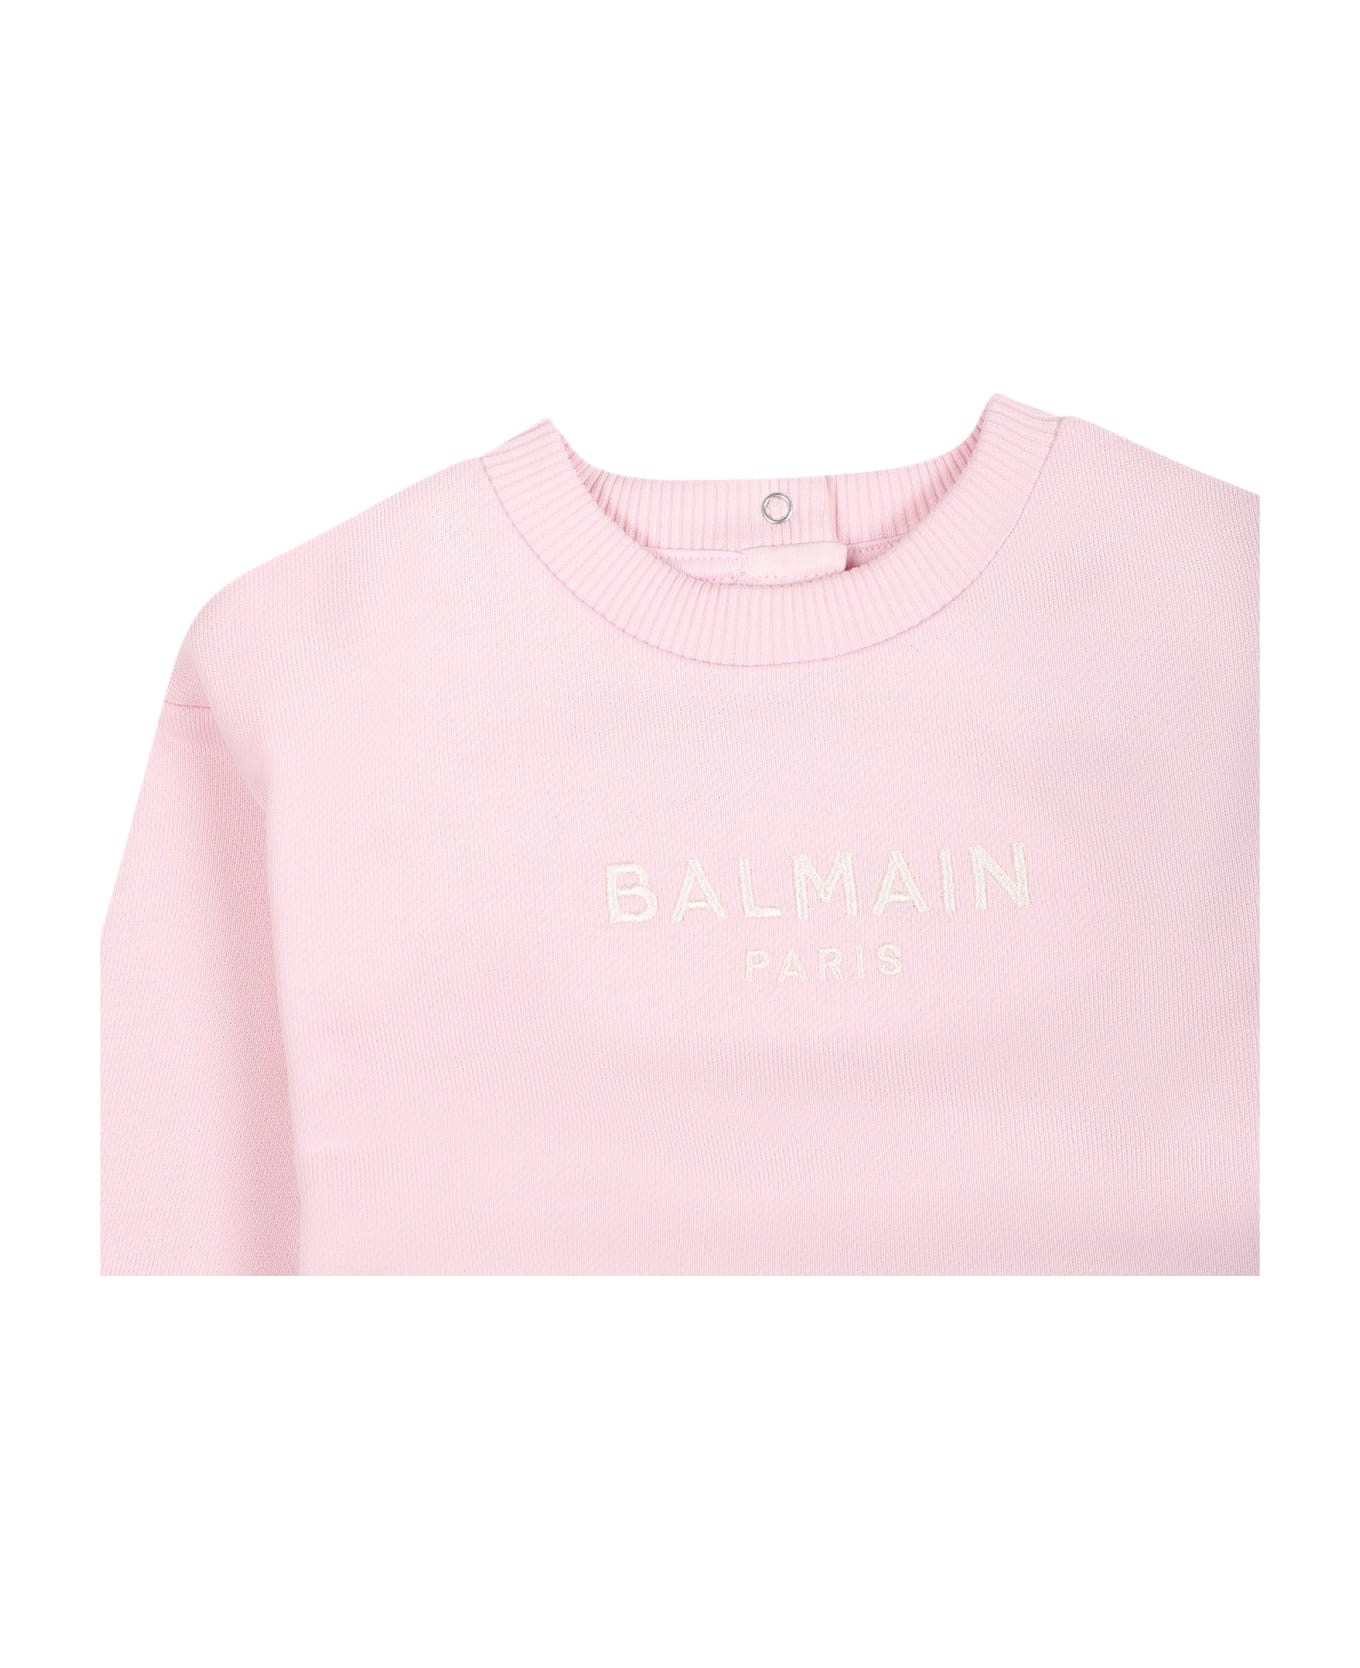 Balmain Pink Sweatshirt For Baby Girl With Embroidered Logo - Pink